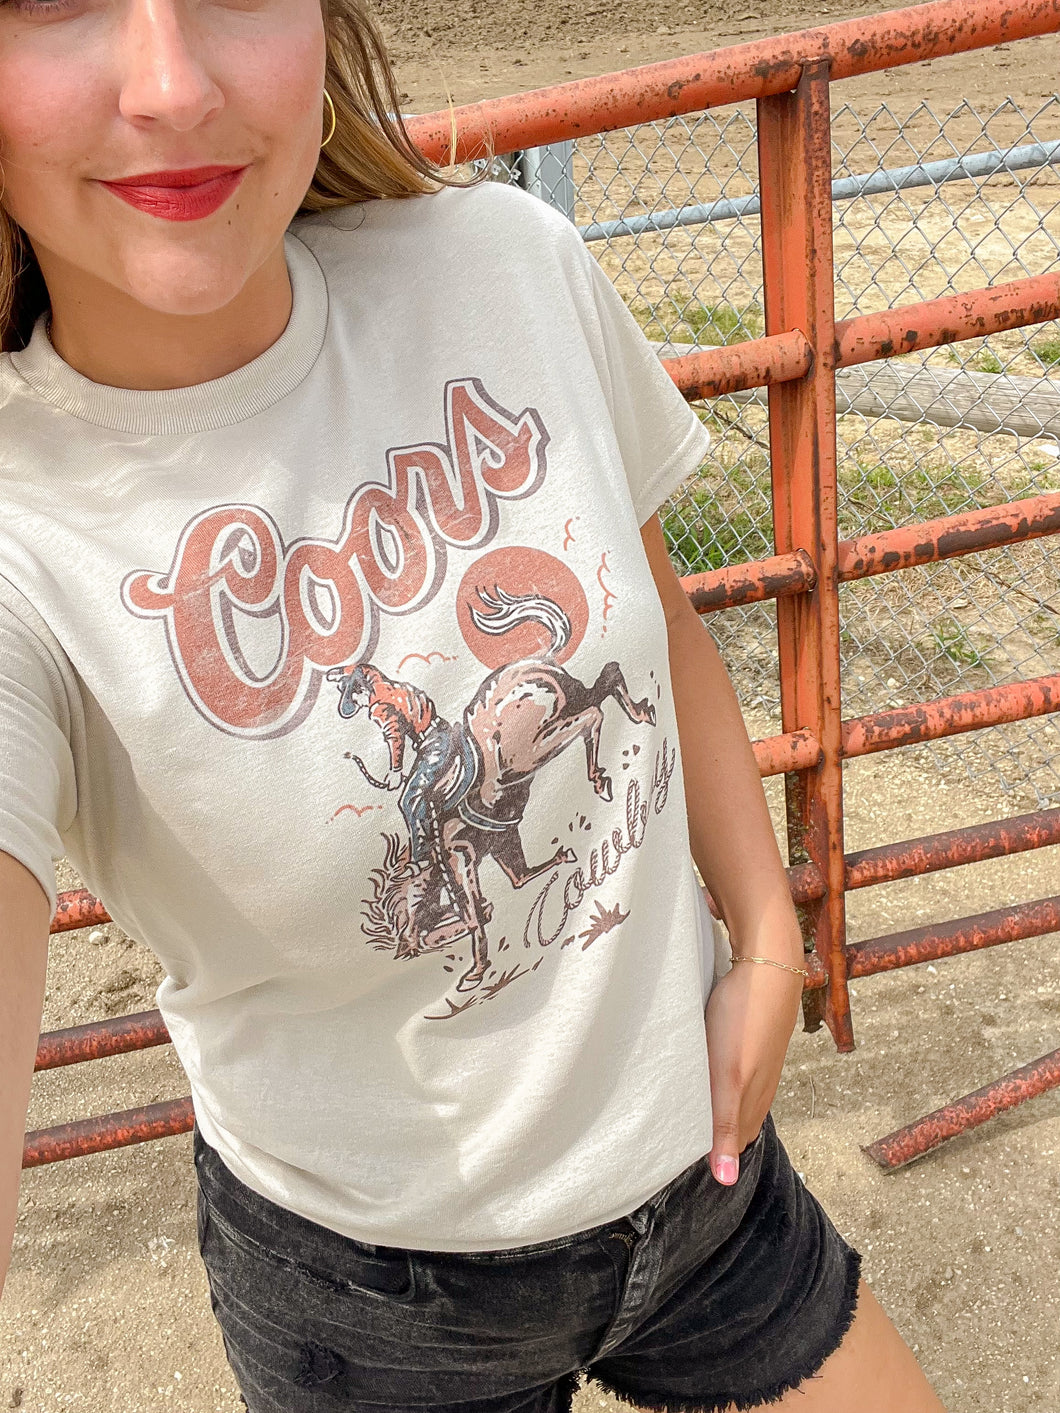 The Coors Cowboy Top